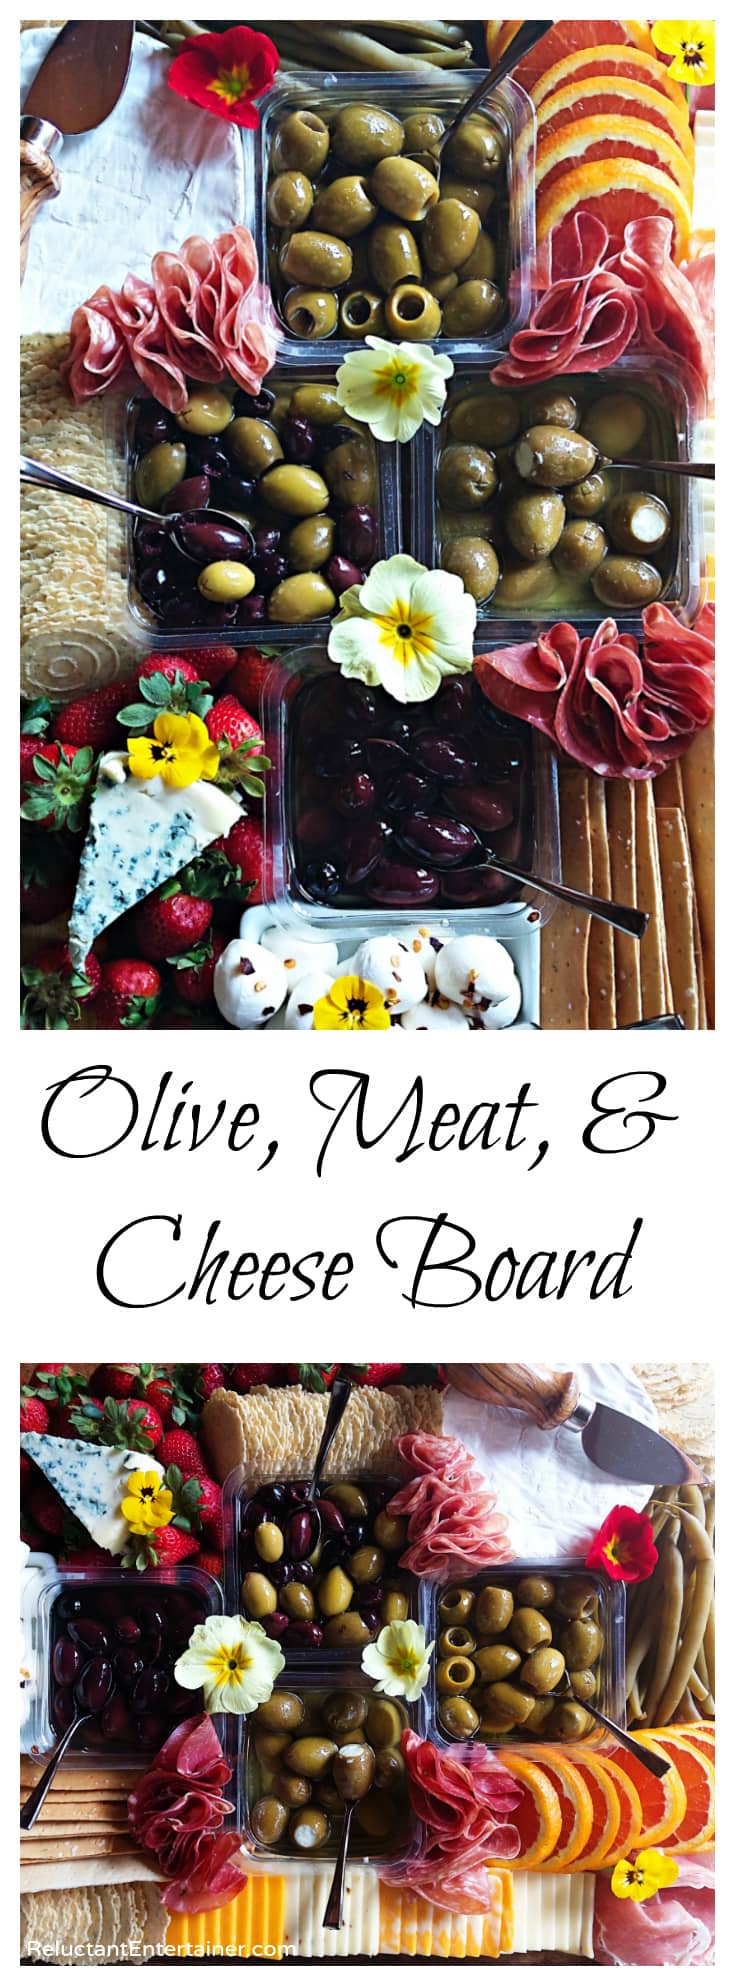 Olive, Meat, Cheese Board Recipe with DeLallo